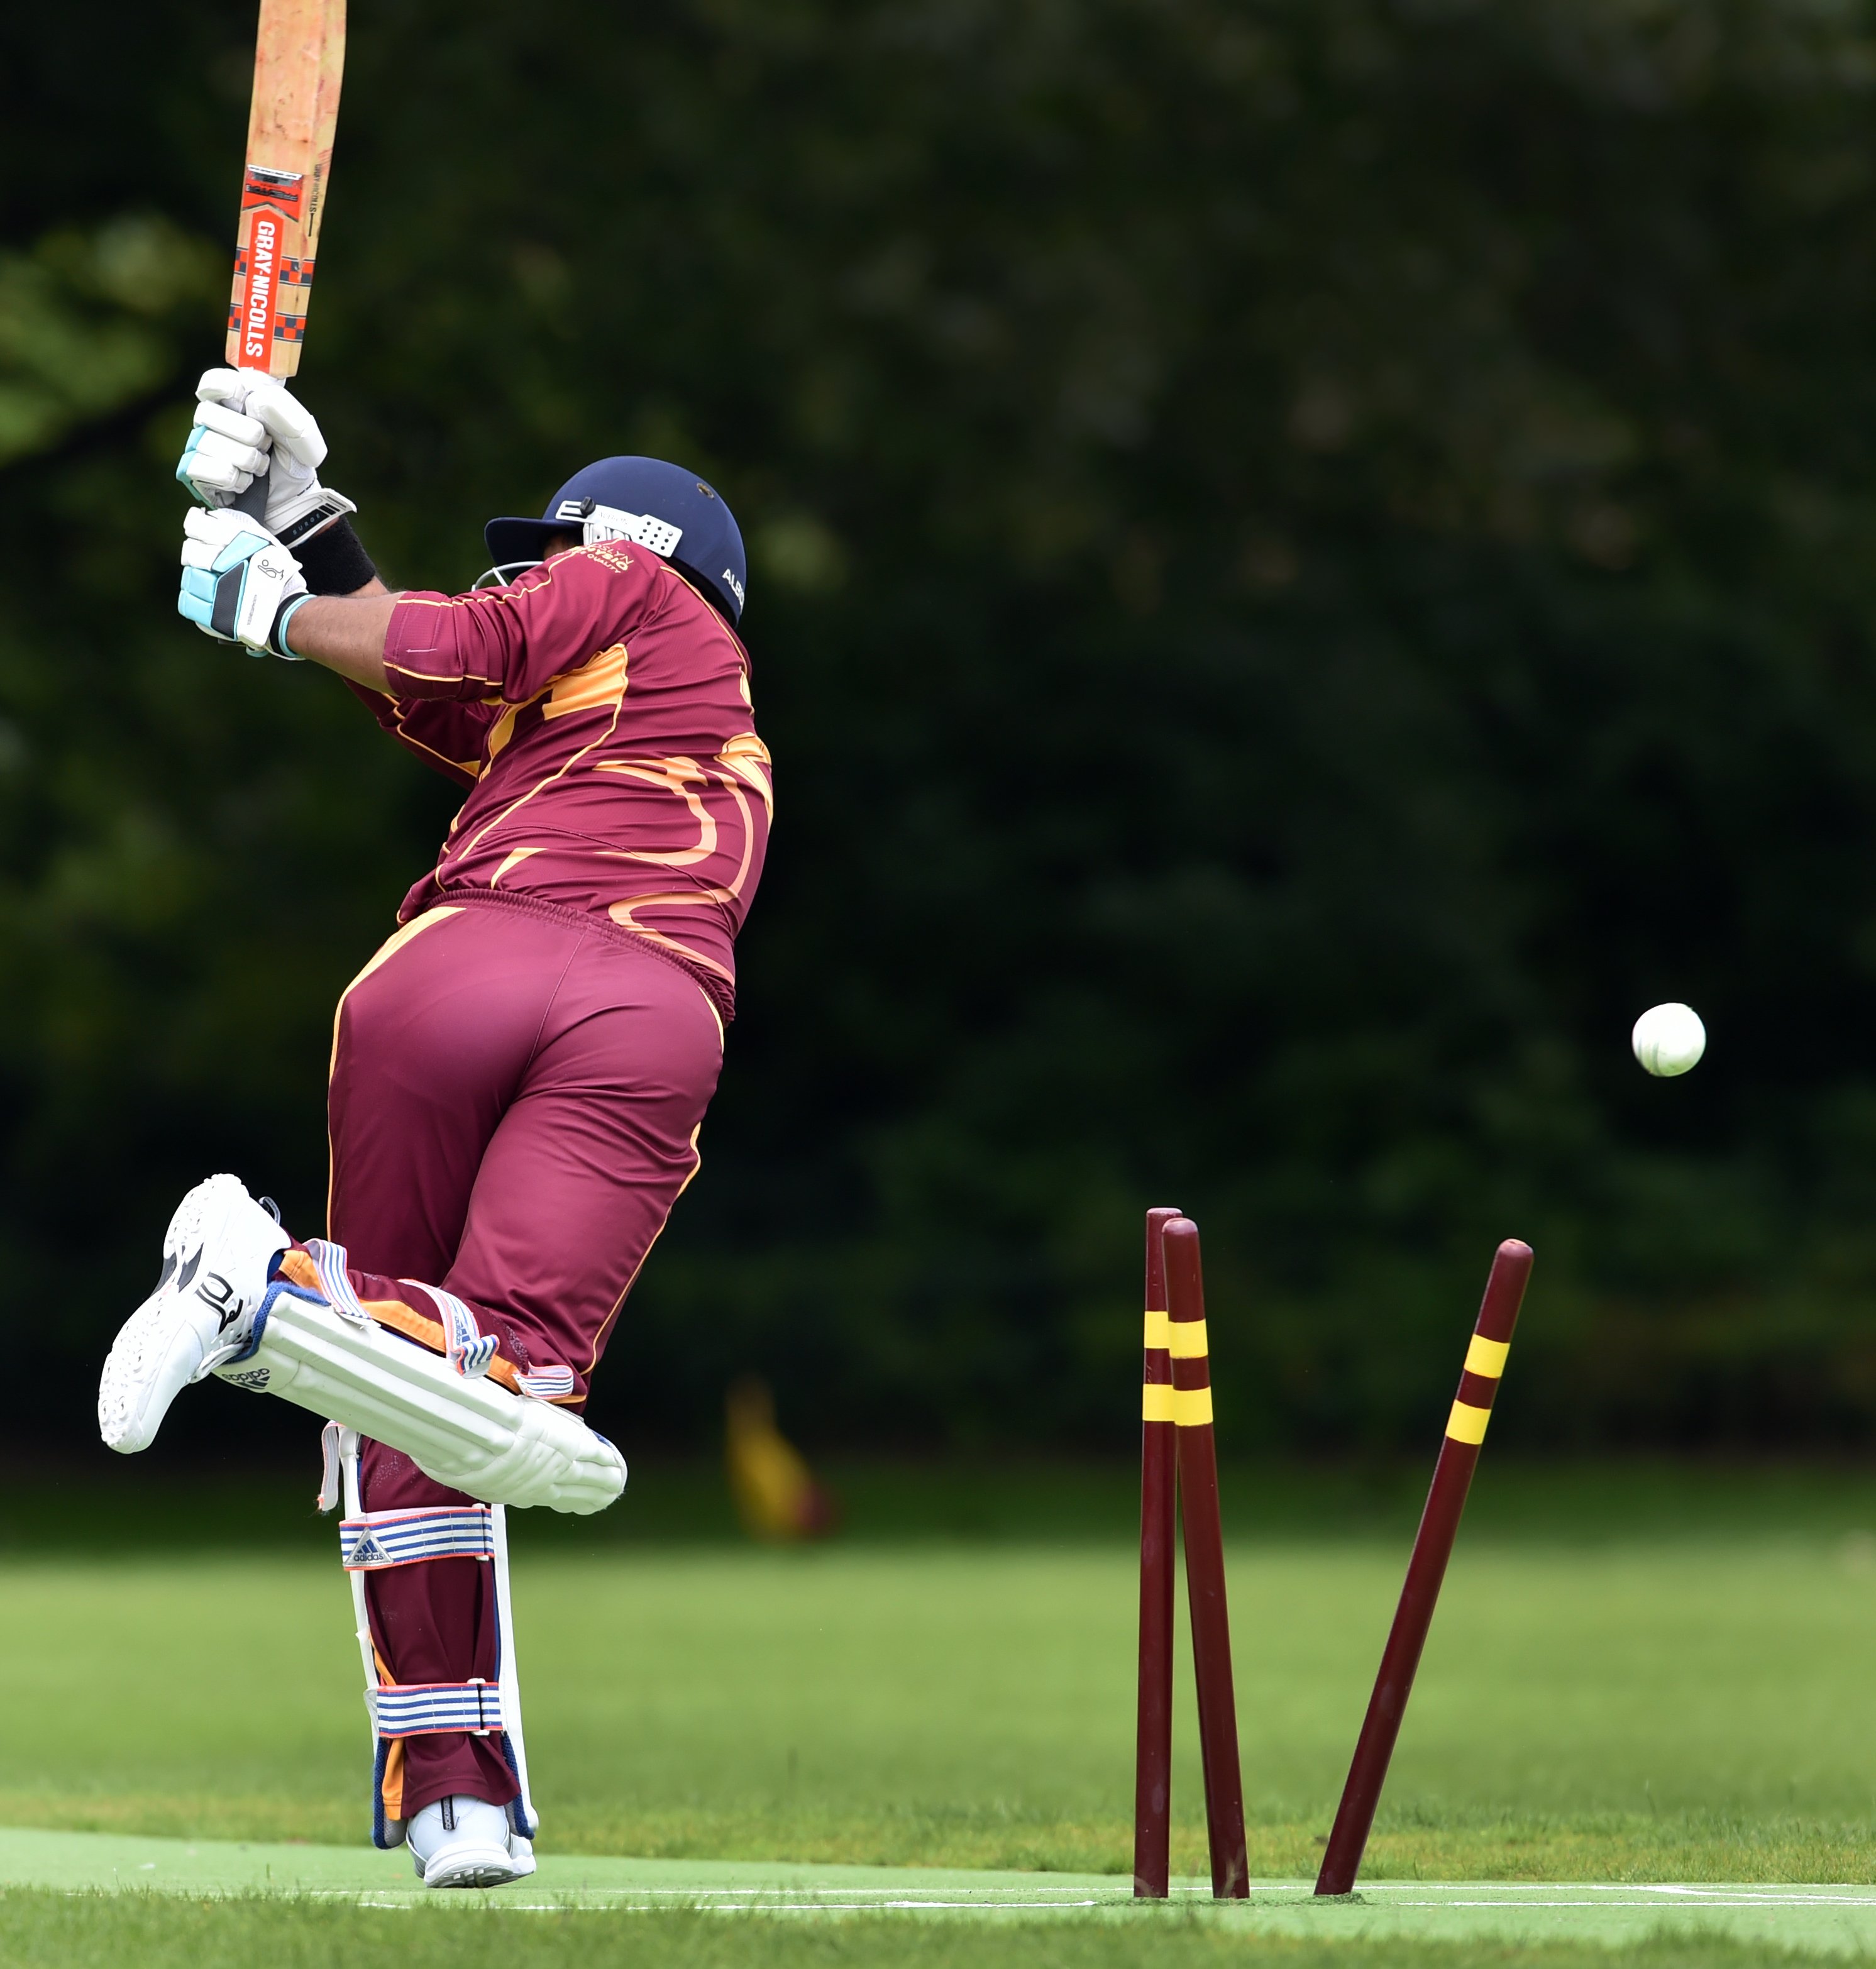 North East Valley batsman Razib Dutta Omi is bowled during his team’s match against the Bay Area...